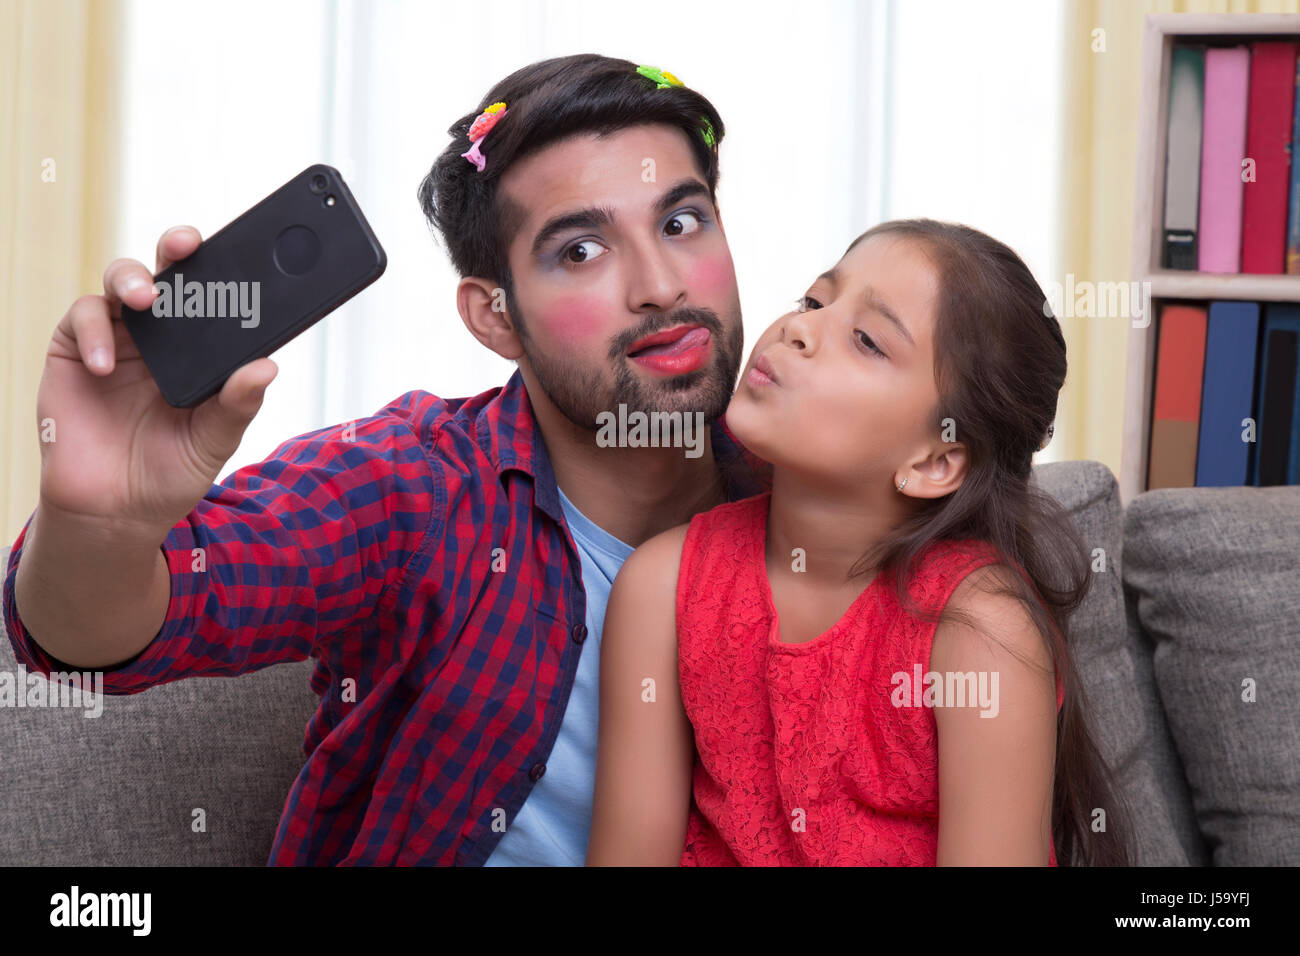 Father wearing make-up pulling funny faces sitting with daughter taking selfie Stock Photo